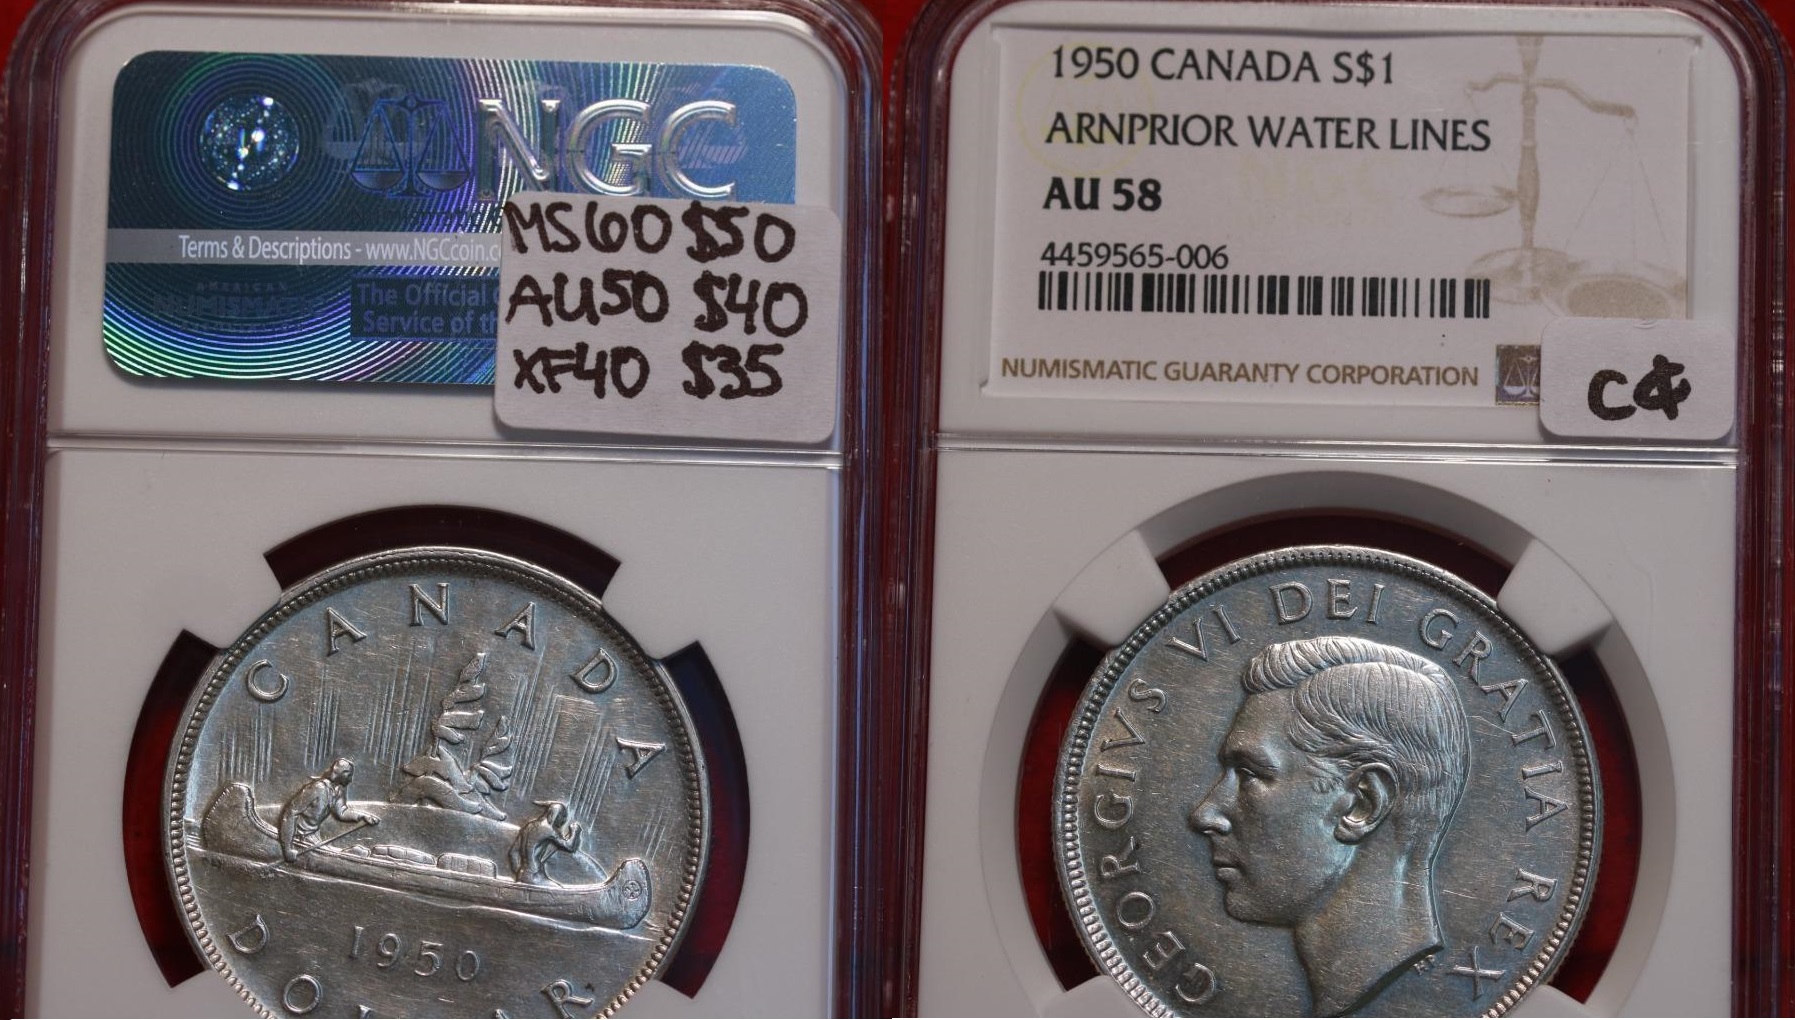 1950 Silver Canada $1 Coin Armprior Water Lines NGC Au-58  $45.44+$2. 362386809710 vette1986.jpg